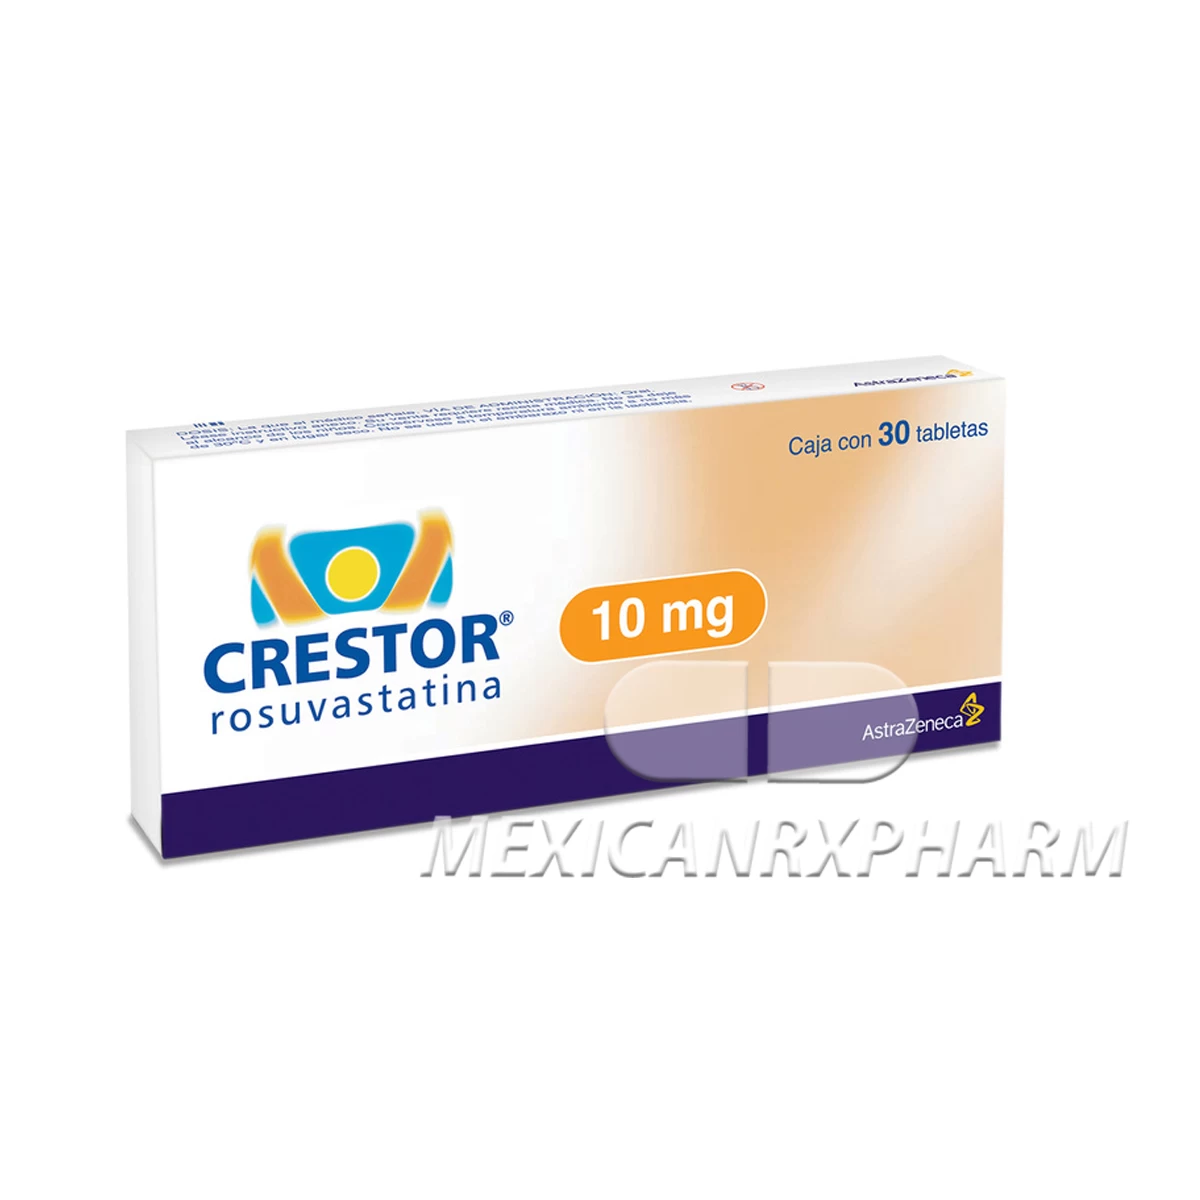 Buy Crestor Rosuvastatin 10 mg 30 tablets For Sale Online at Cheap Rates